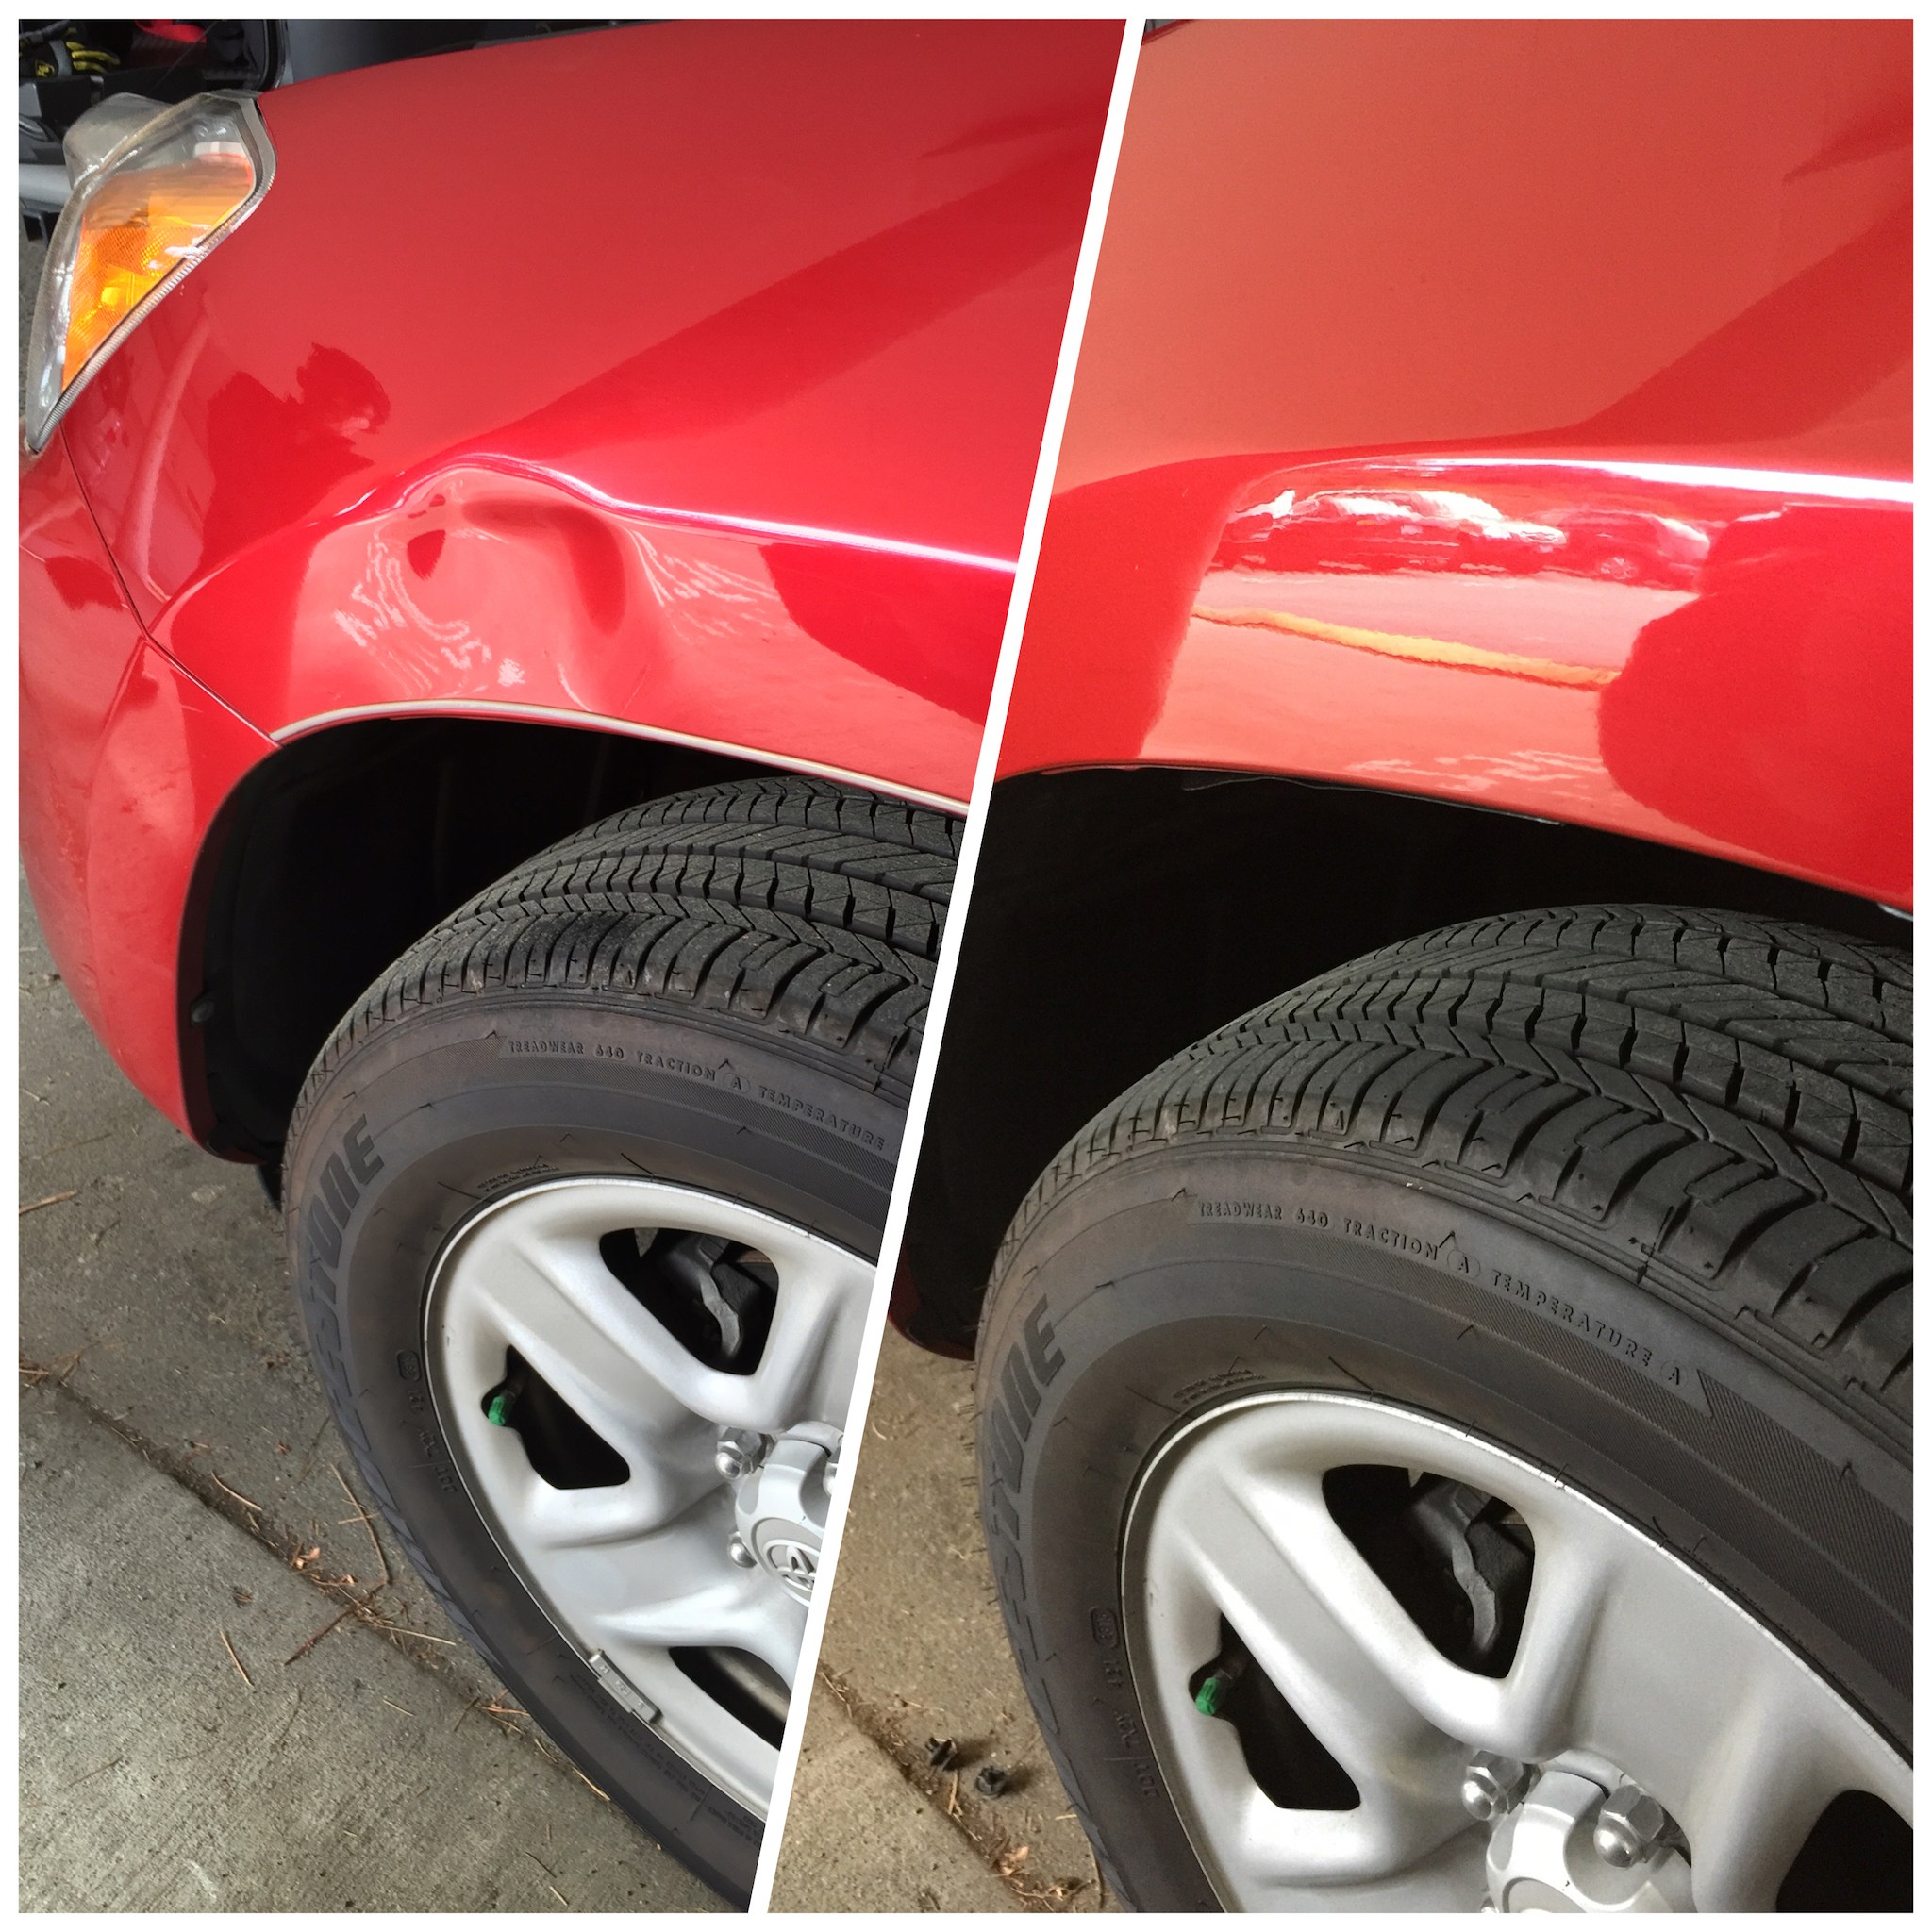 Paintless Dent Repair - Dent Removal Service - A1 Auto Body Shop